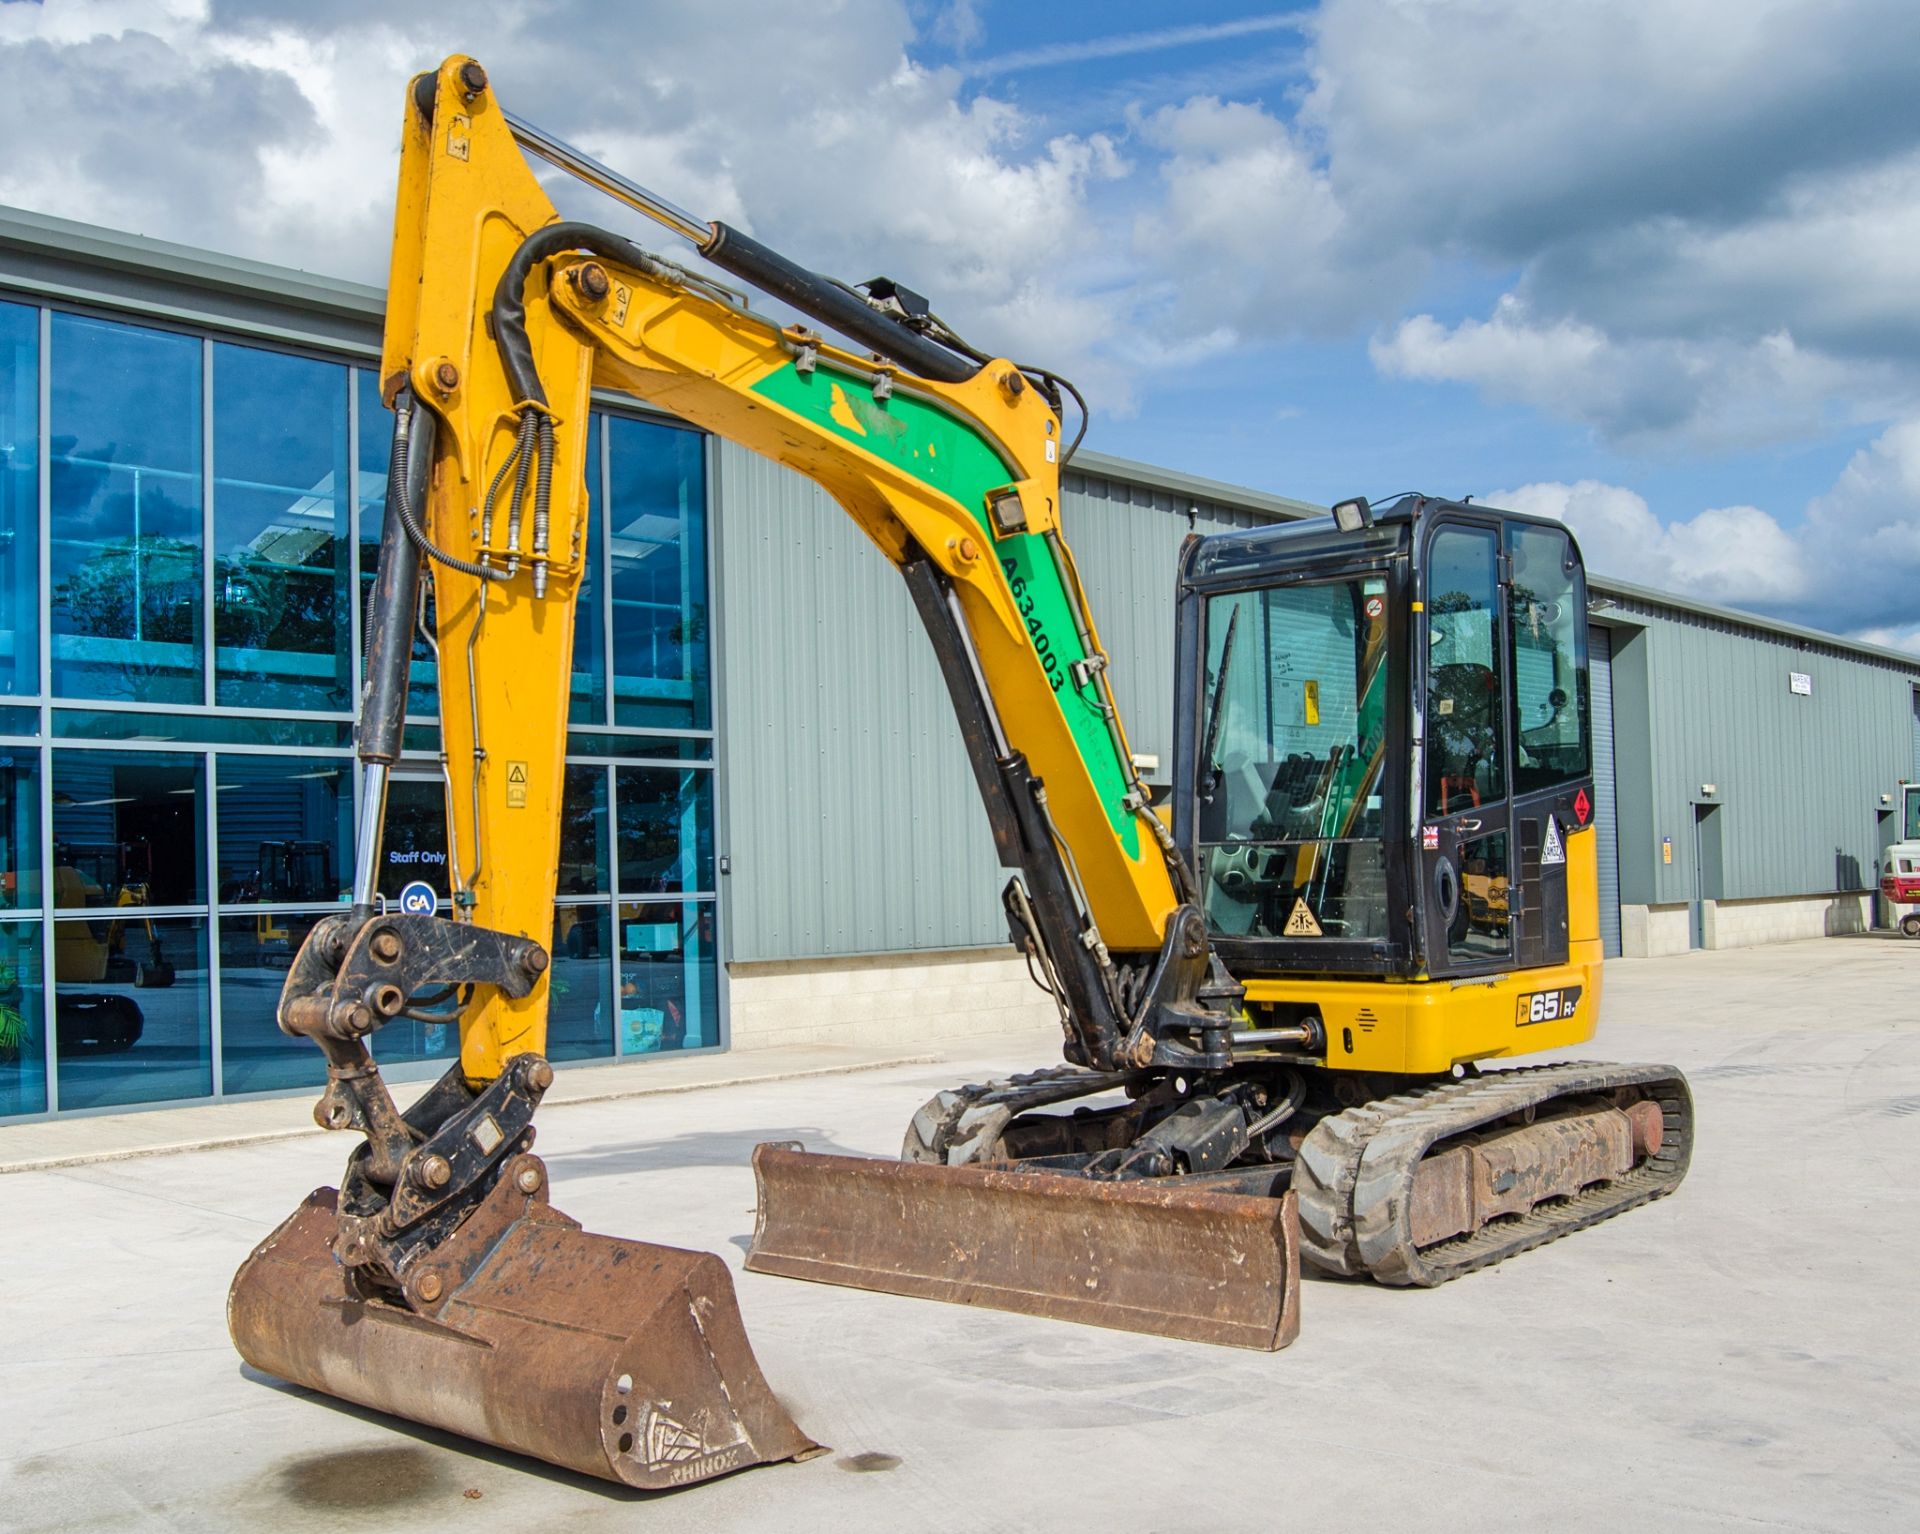 JCB 65 R-1 6.5 tonne rubber tracked excavator Year: 2015 S/N: 1914106 Recorded Hours: 176 (Suspect